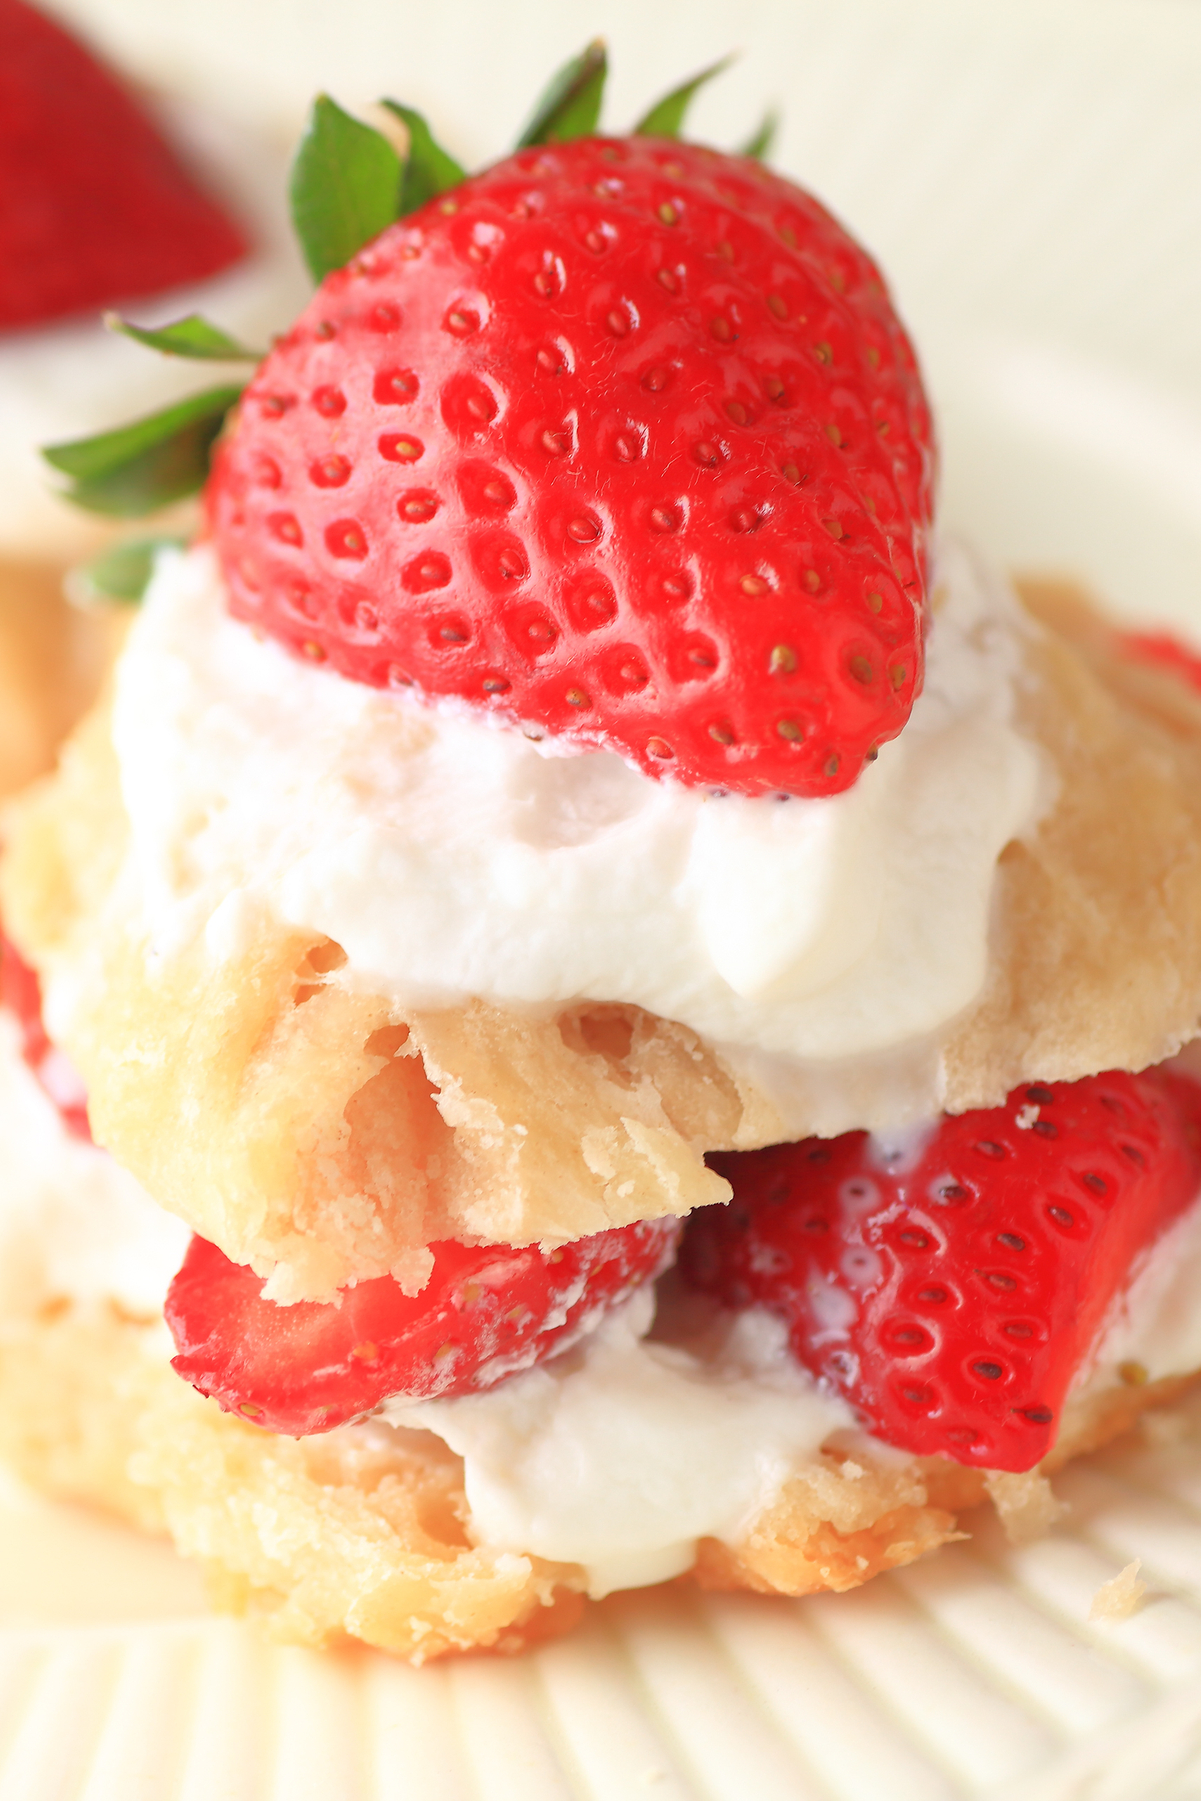 Weight Watchers Homemade Strawberry Shortcake on a white plate.